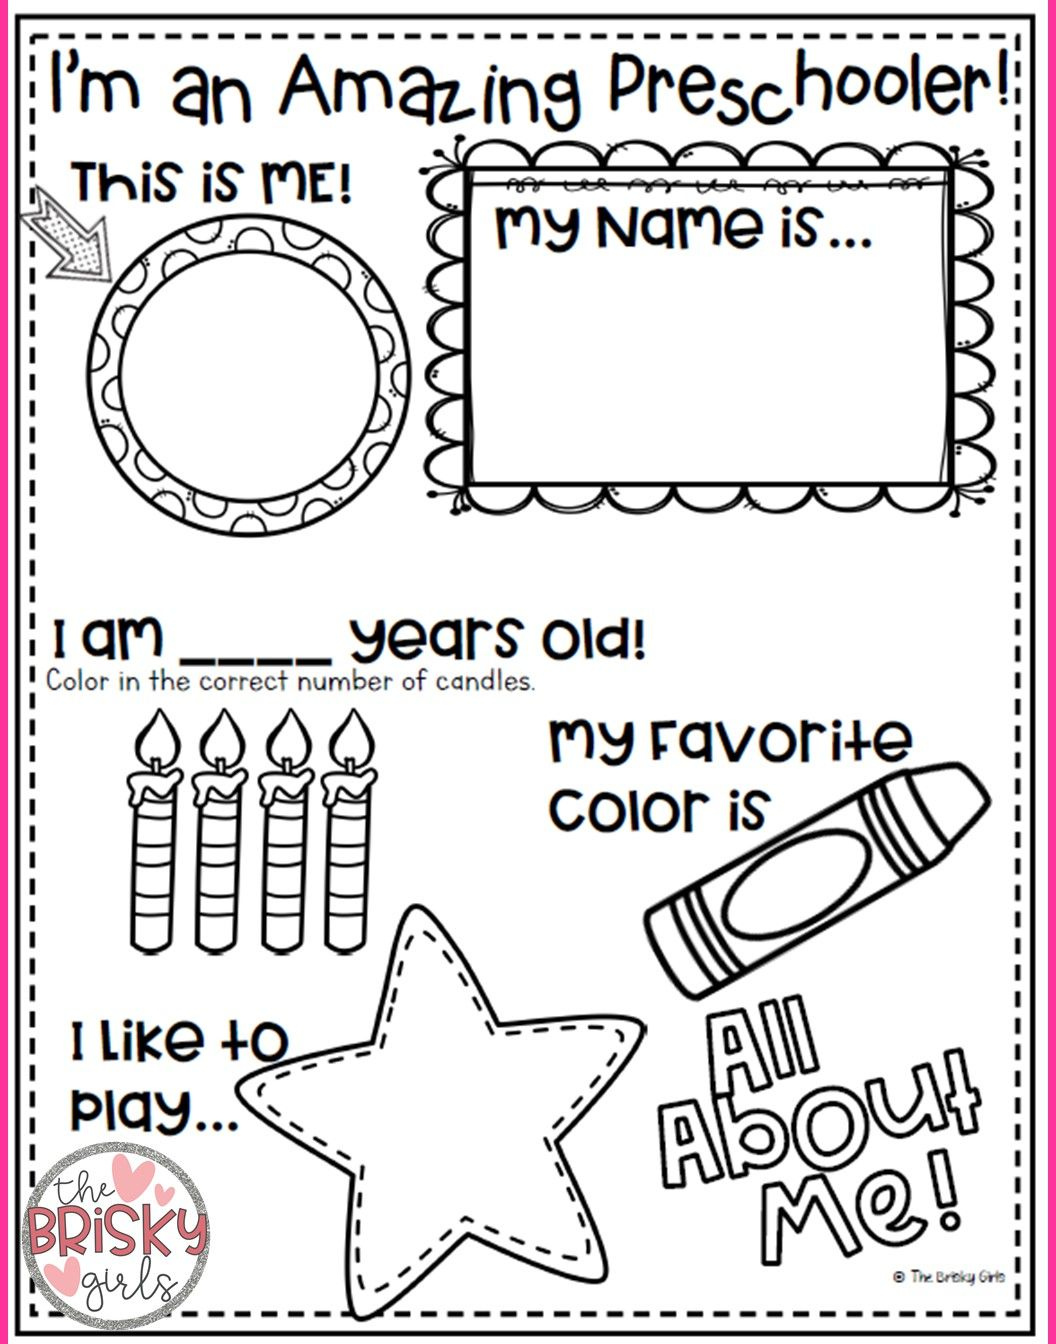 all-about-me-preschool-activities-from-abcs-to-acts